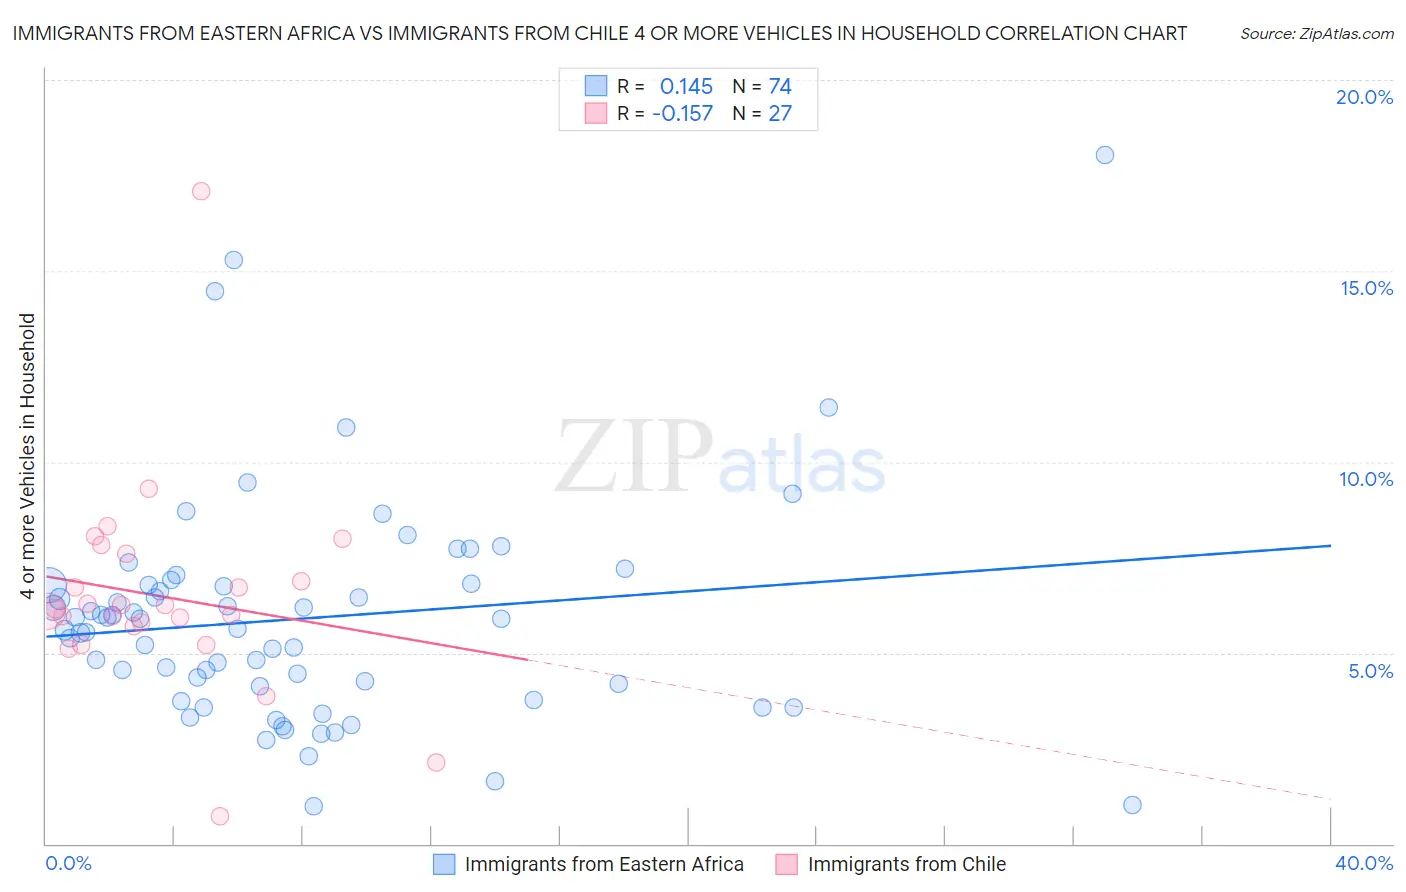 Immigrants from Eastern Africa vs Immigrants from Chile 4 or more Vehicles in Household